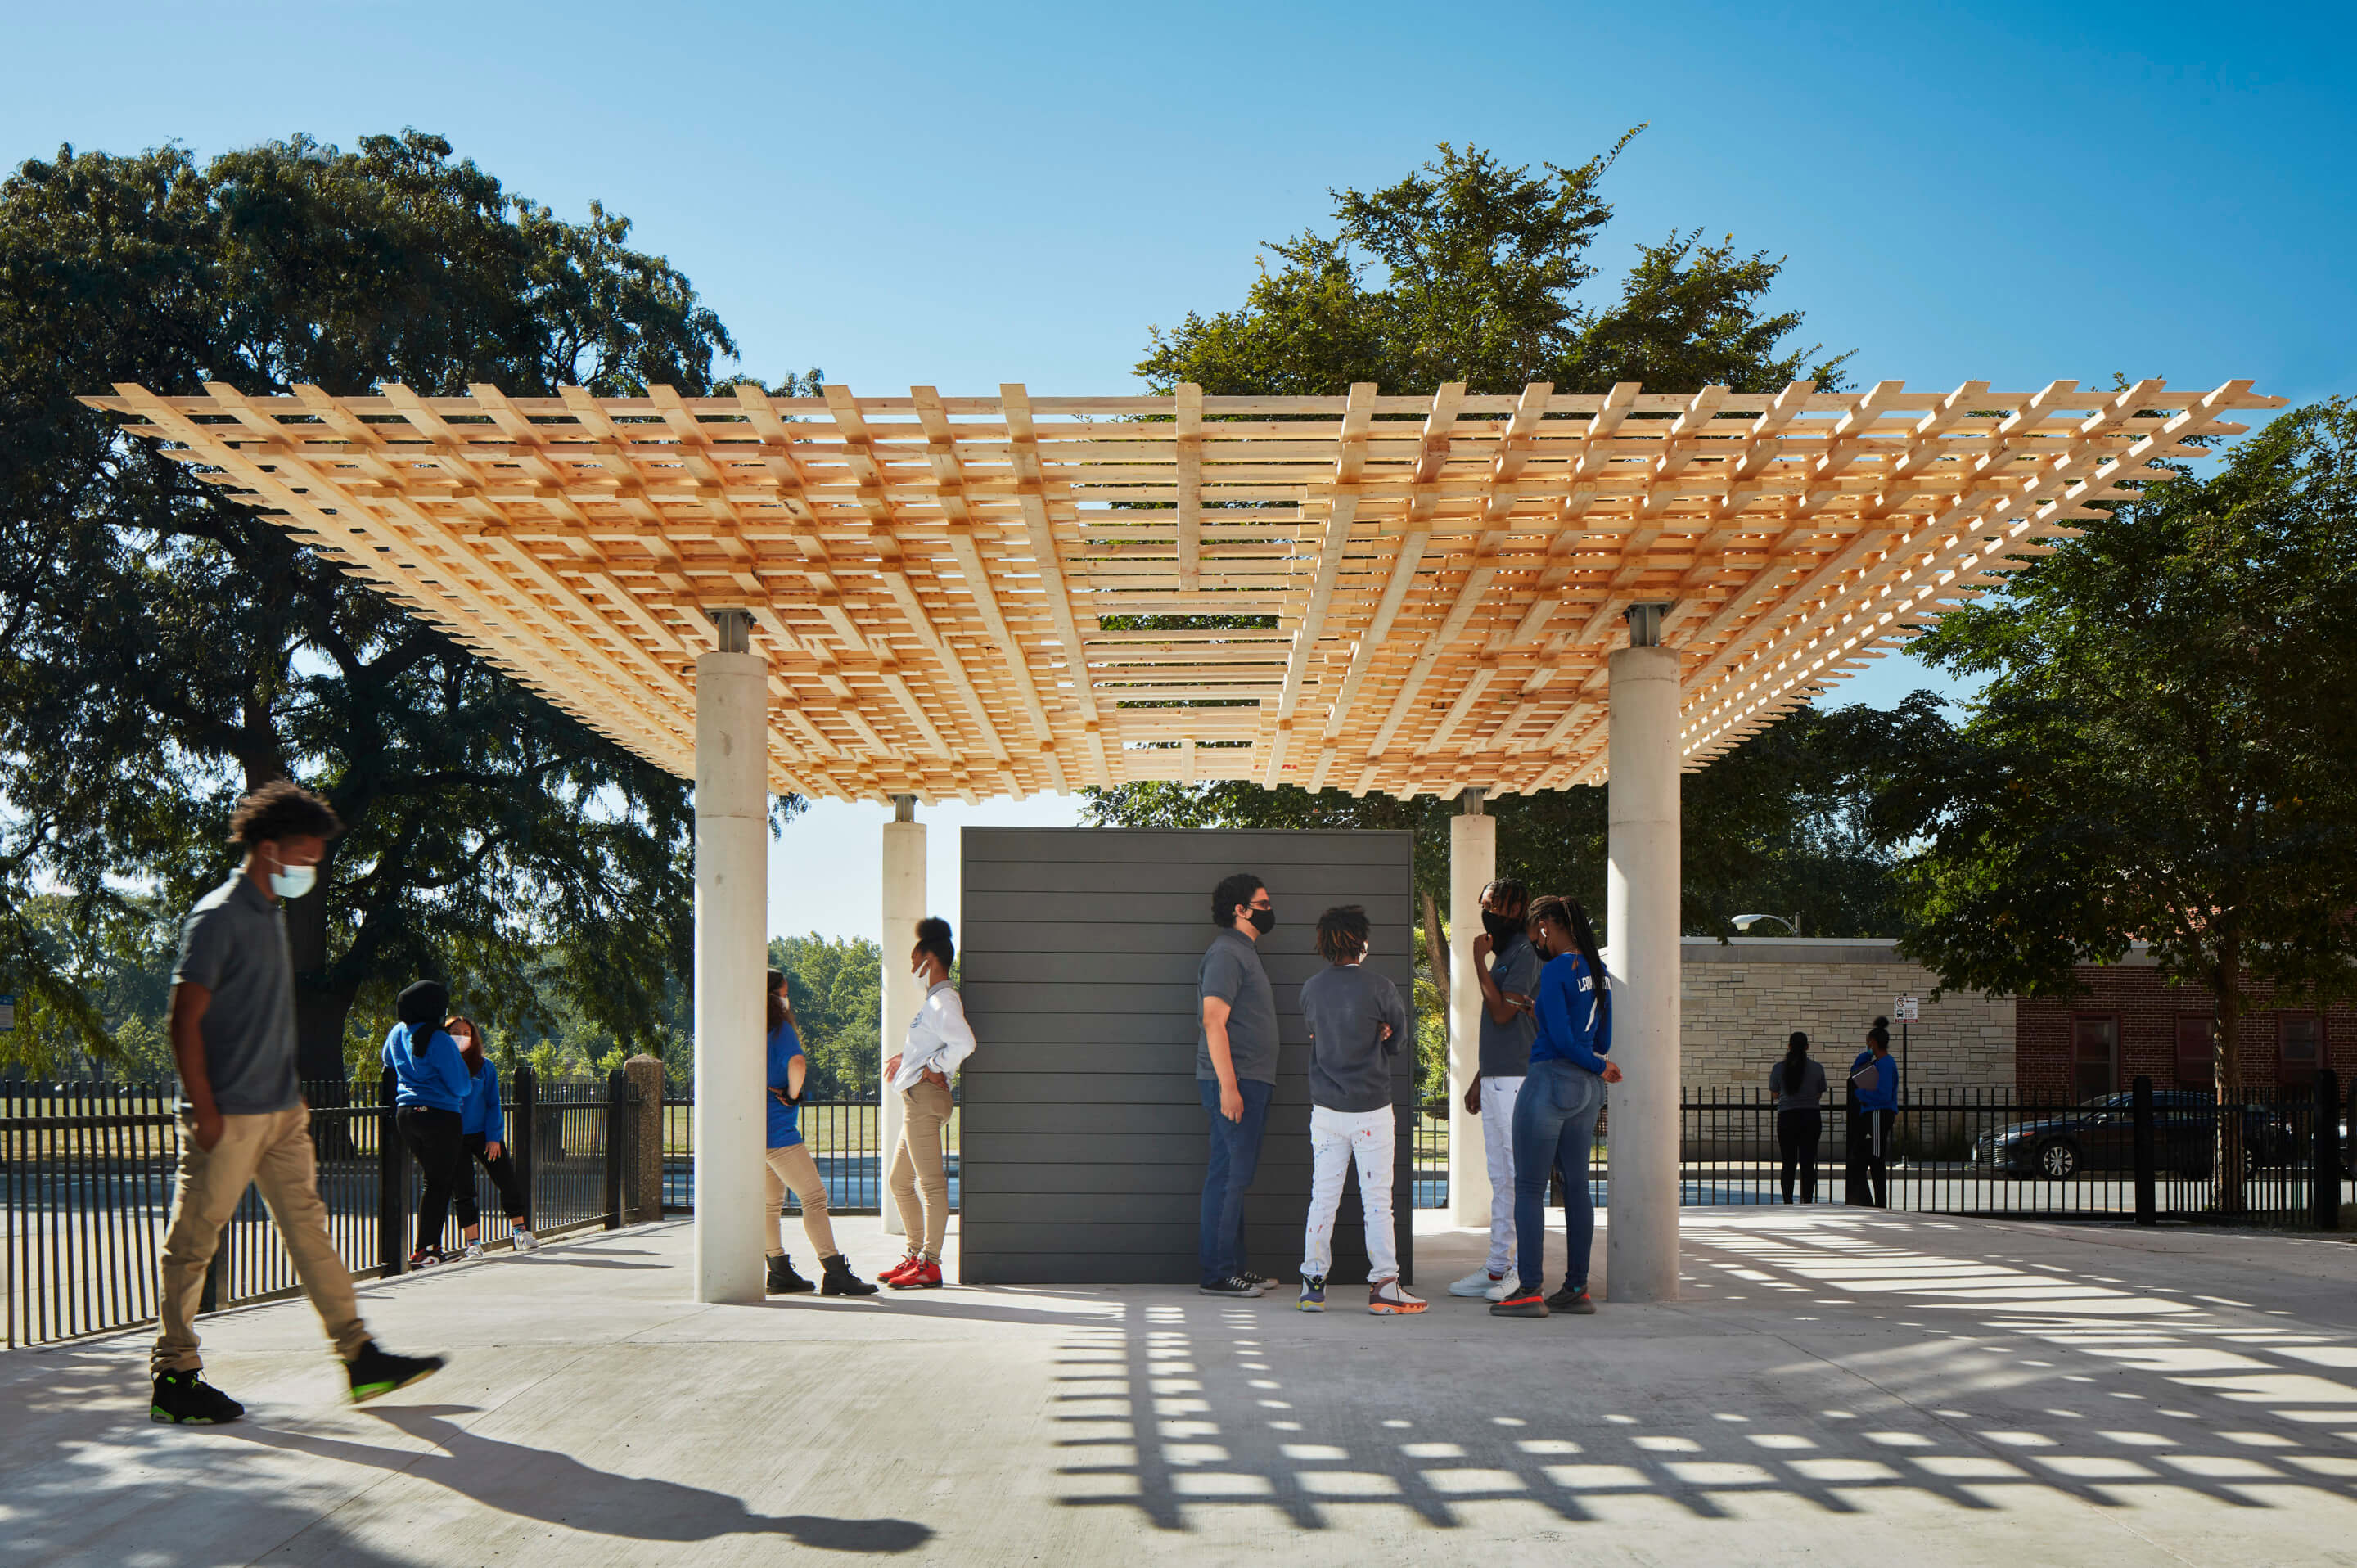 people gather beneath a sheltered outdoor pavilion with a timber roof structure